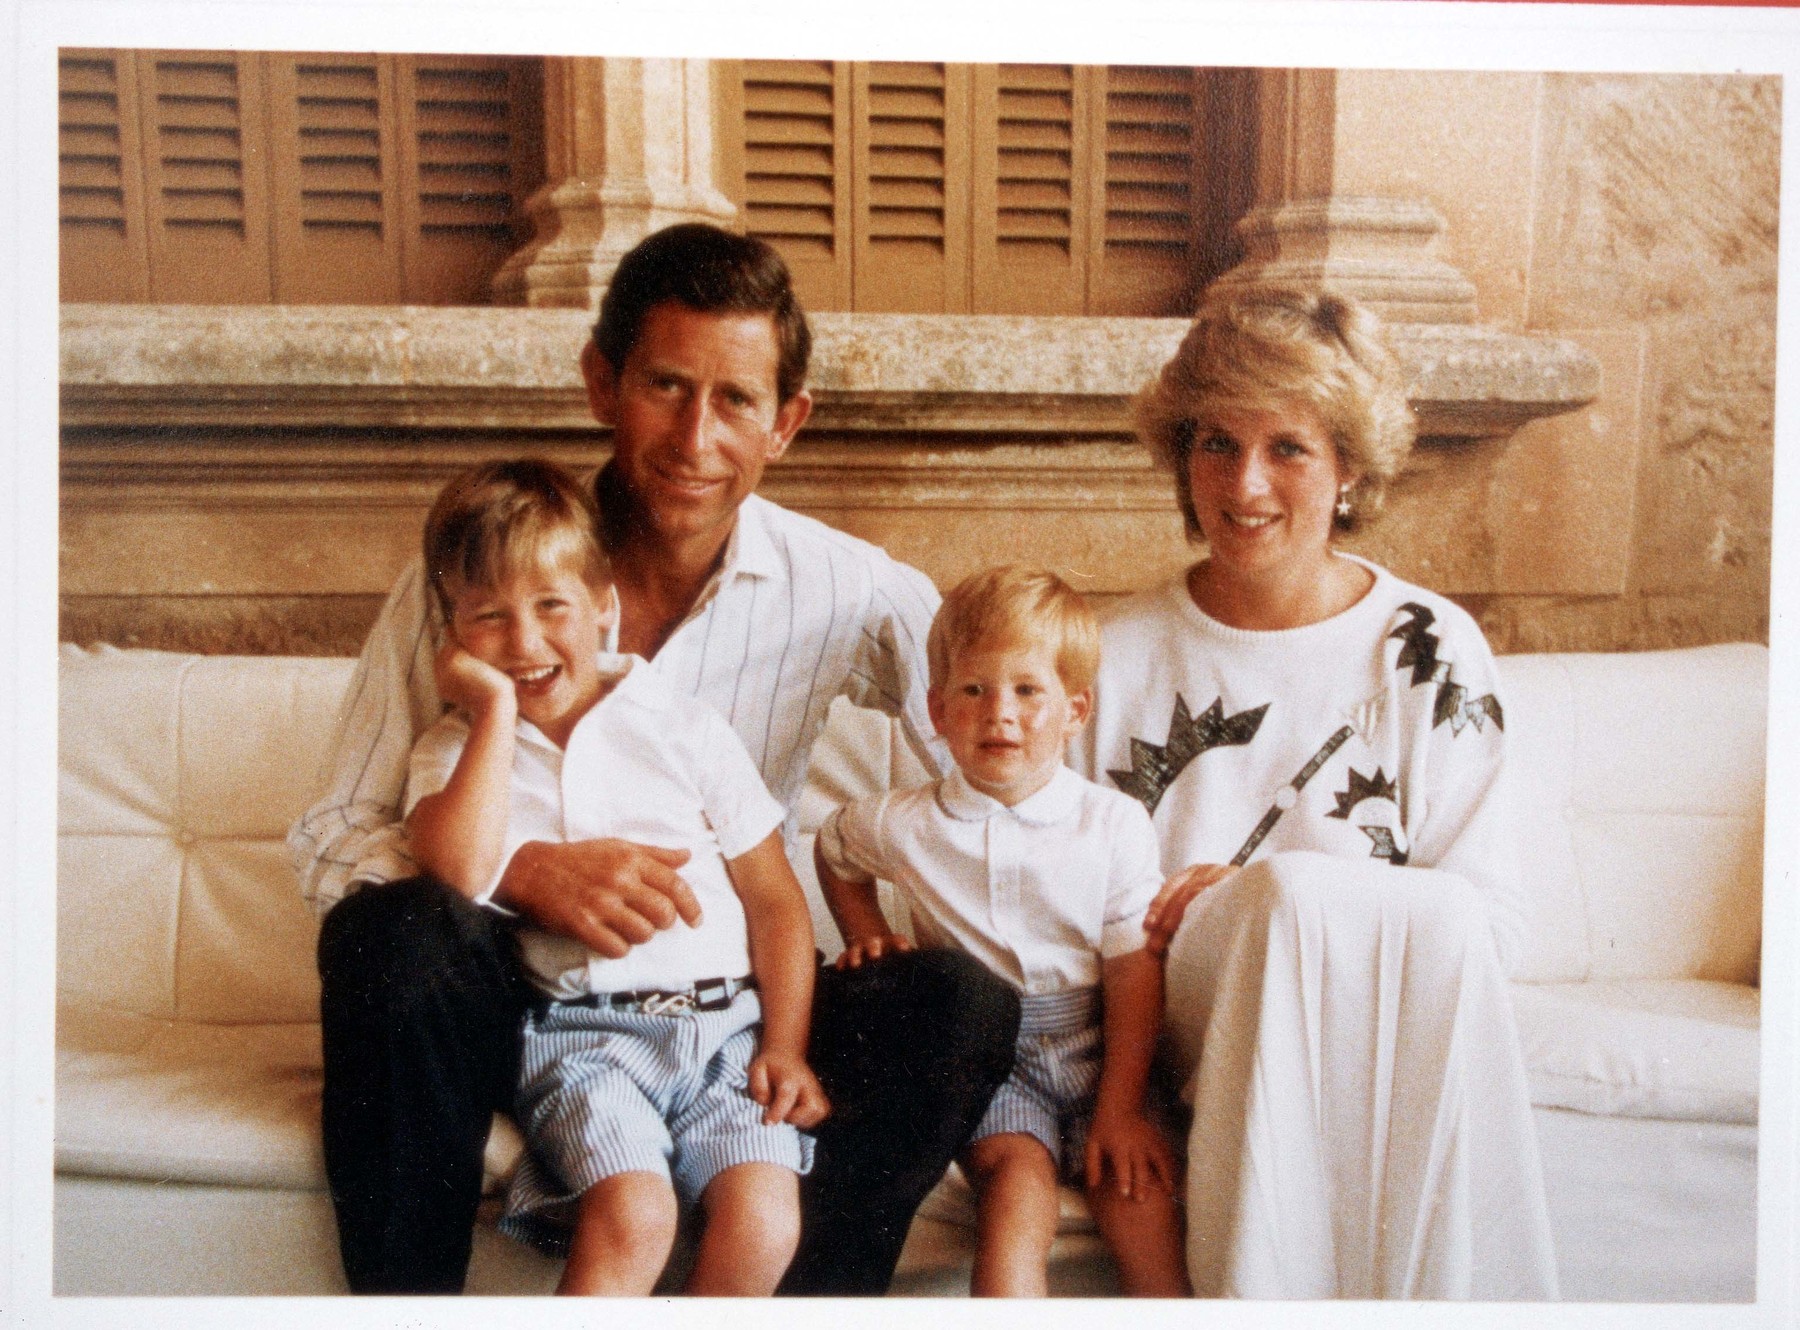 Christmas Card From The Prince And Princess Of Wales In 1987. The Picture Shows Prince Charles Princess Diana (diana Princess Of Wales Died August 1997) Prince William And Prince Harry On Holiday Together In Spain.
Christmas Card From The Prince And Princess Of Wales In 1987. The Picture Shows Prince Charles Princess Diana (diana Princess Of Wales Died August 1997) Prince William And Prince Harry On Holiday Together In Spain.,Image: 230963593, License: Rights-managed, Restrictions: , Model Release: no, Credit line: Nick Skinner / Daily Mail / Shutterstock Editorial / Profimedia